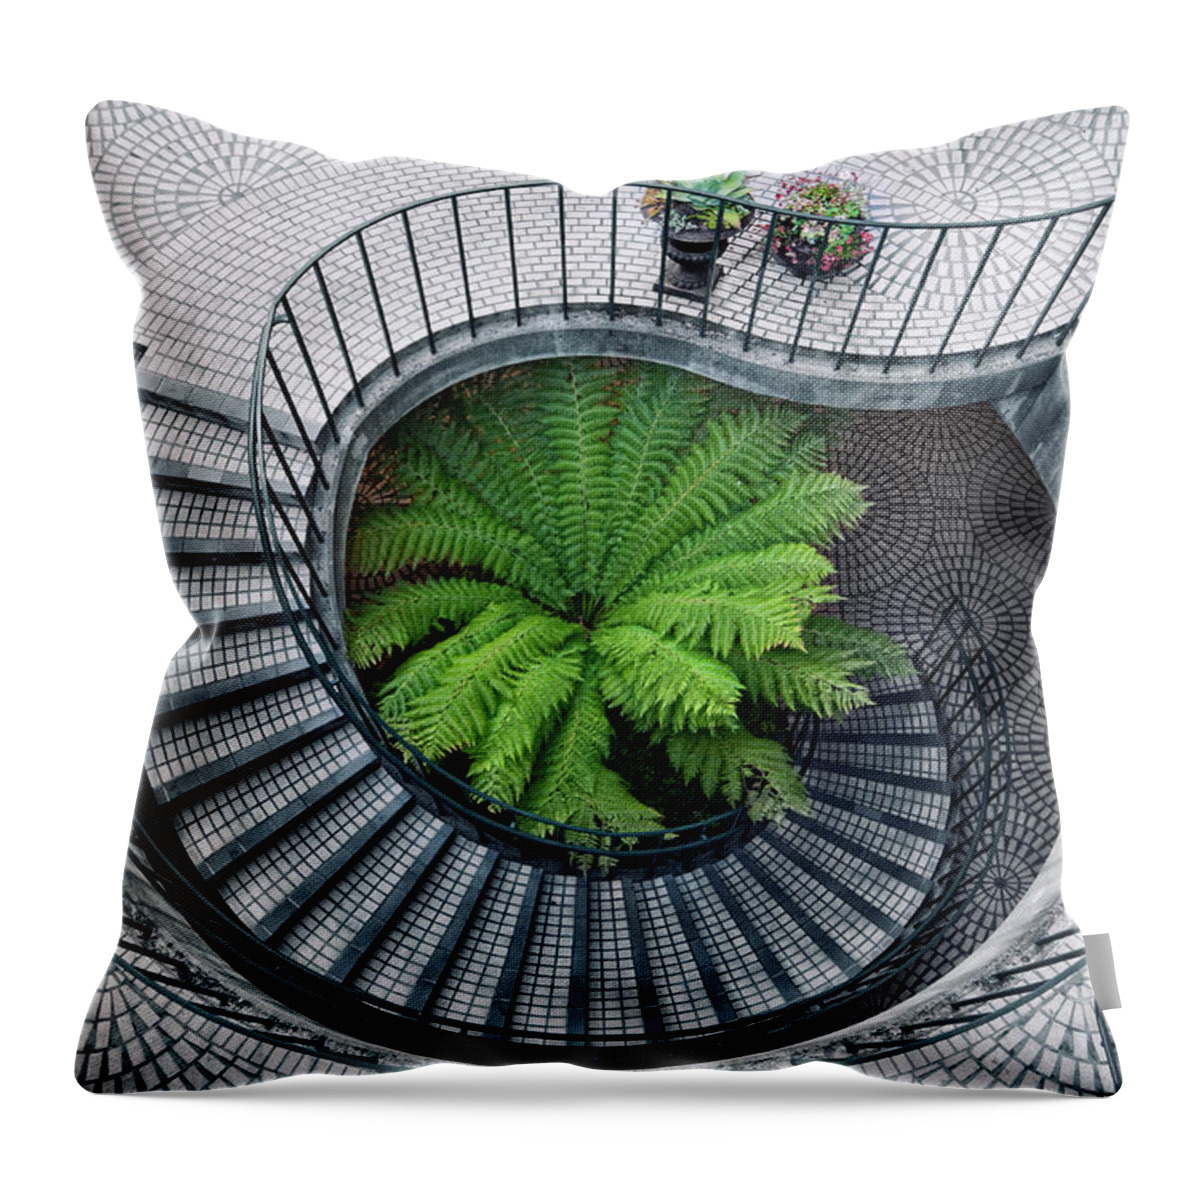 San Francisco Throw Pillow featuring the photograph Elephant Fern by Lee Sie Photography